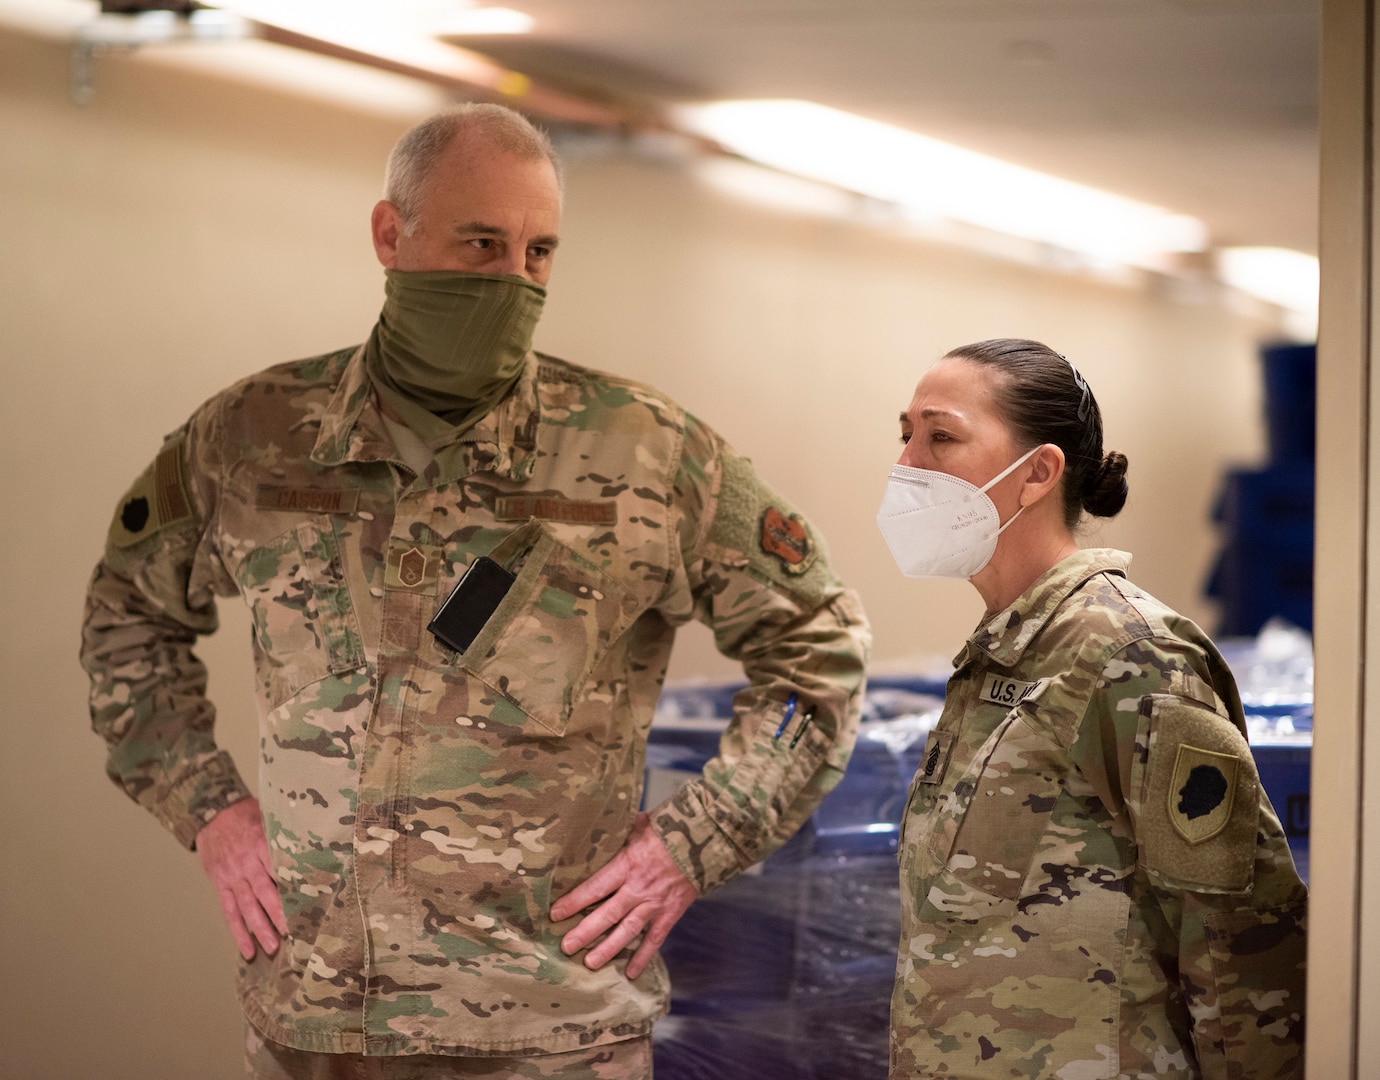 Command Sgt. Maj. Dena Ballowe (right), Illinois National Guard Senior Enlisted Leader, talks to Chief Master Sgt. William Casson (left), from the 183d Wing, Springfield, Illinois, at Westlake Alternate Care Facility, Melrose Park, Illinois, May 6, 2020. Ballowe, along with Brig. Gen. Richard Neely, the Adjutant General of the Illinois National Guard, traveled to the upstate area to visit different sites where National Guard service members are on mission. Ballowe retired Oct. 31 after 32 years of service in the Illinois Army National Guard.